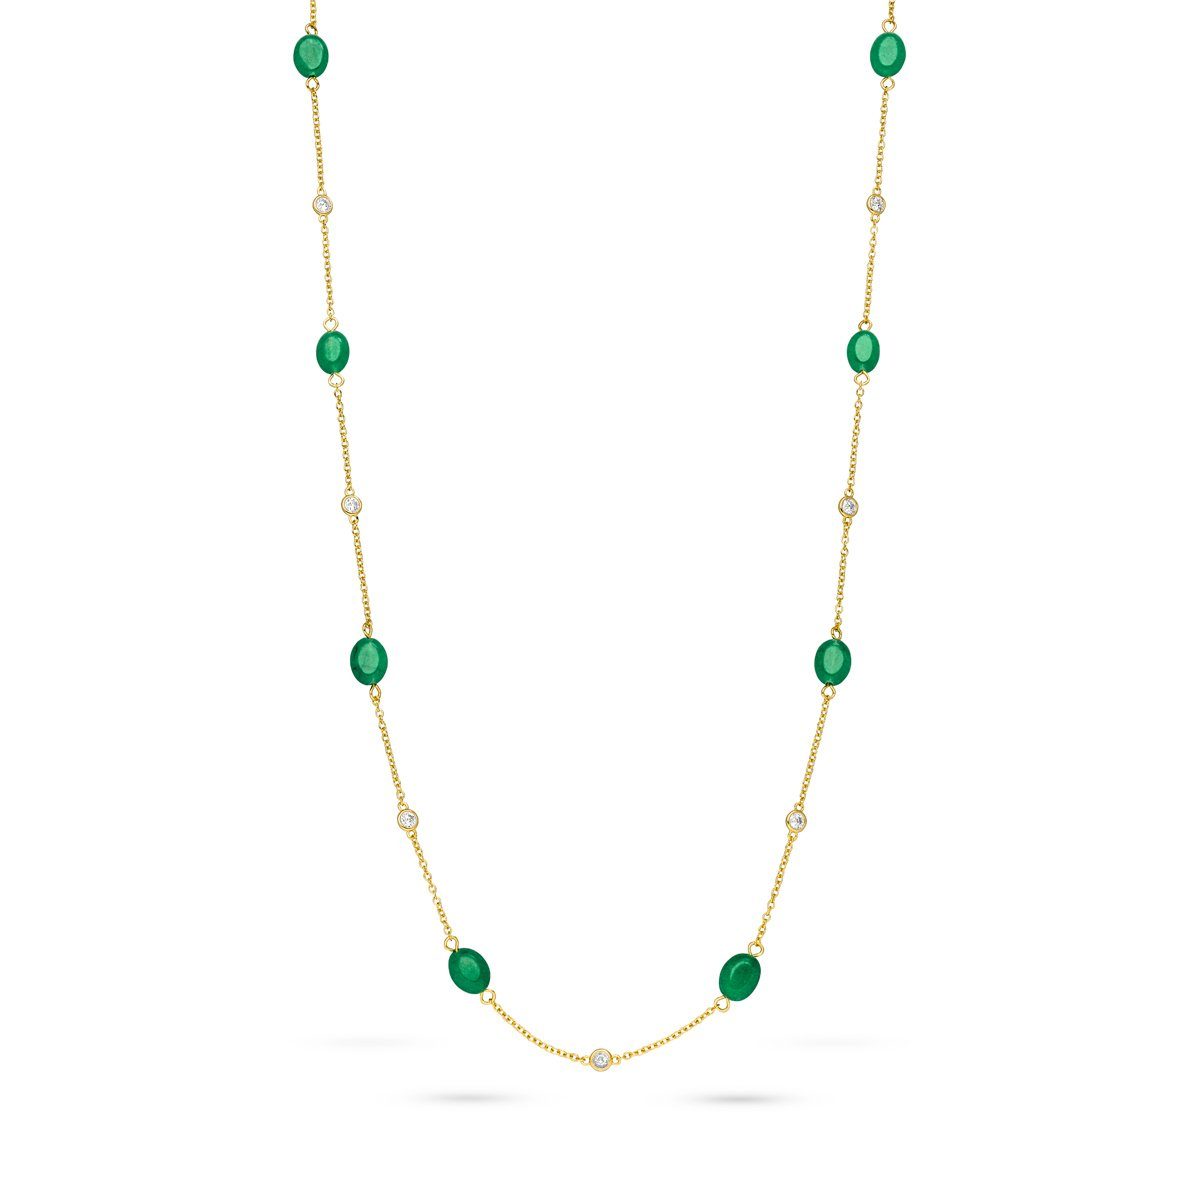 Fiocco Jewelry Collier Bloomy Green Silber Kette, 925